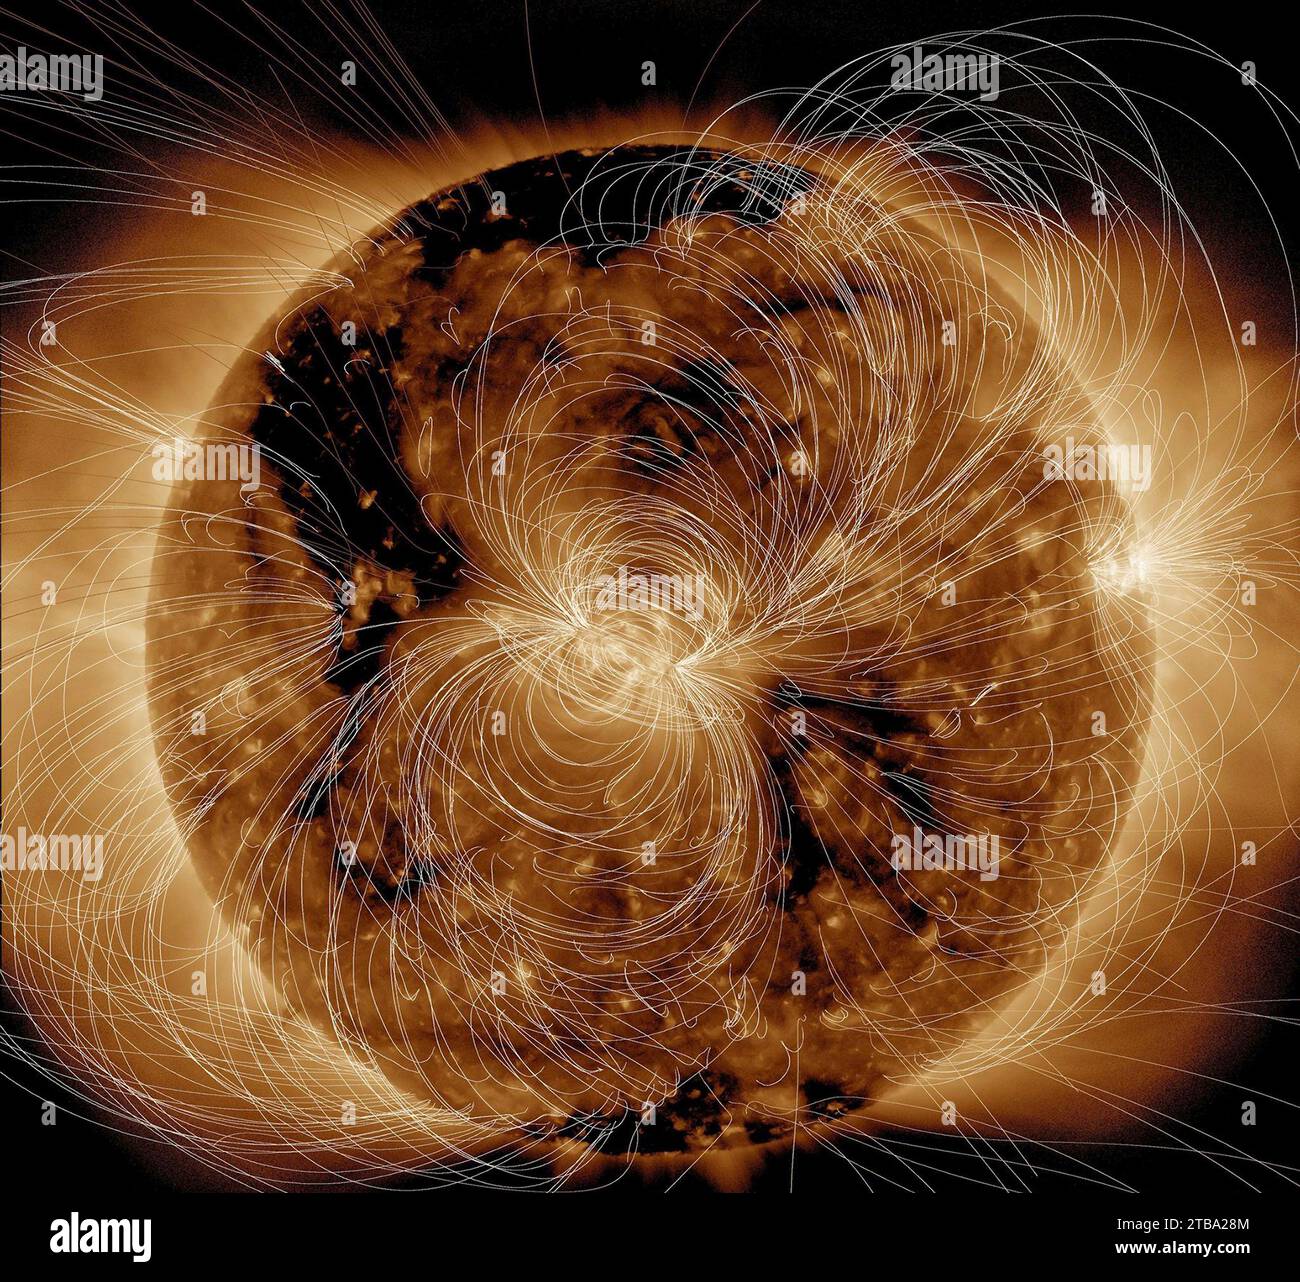 August 10, 2018 - View of the Sun's magnetic field. Stock Photo